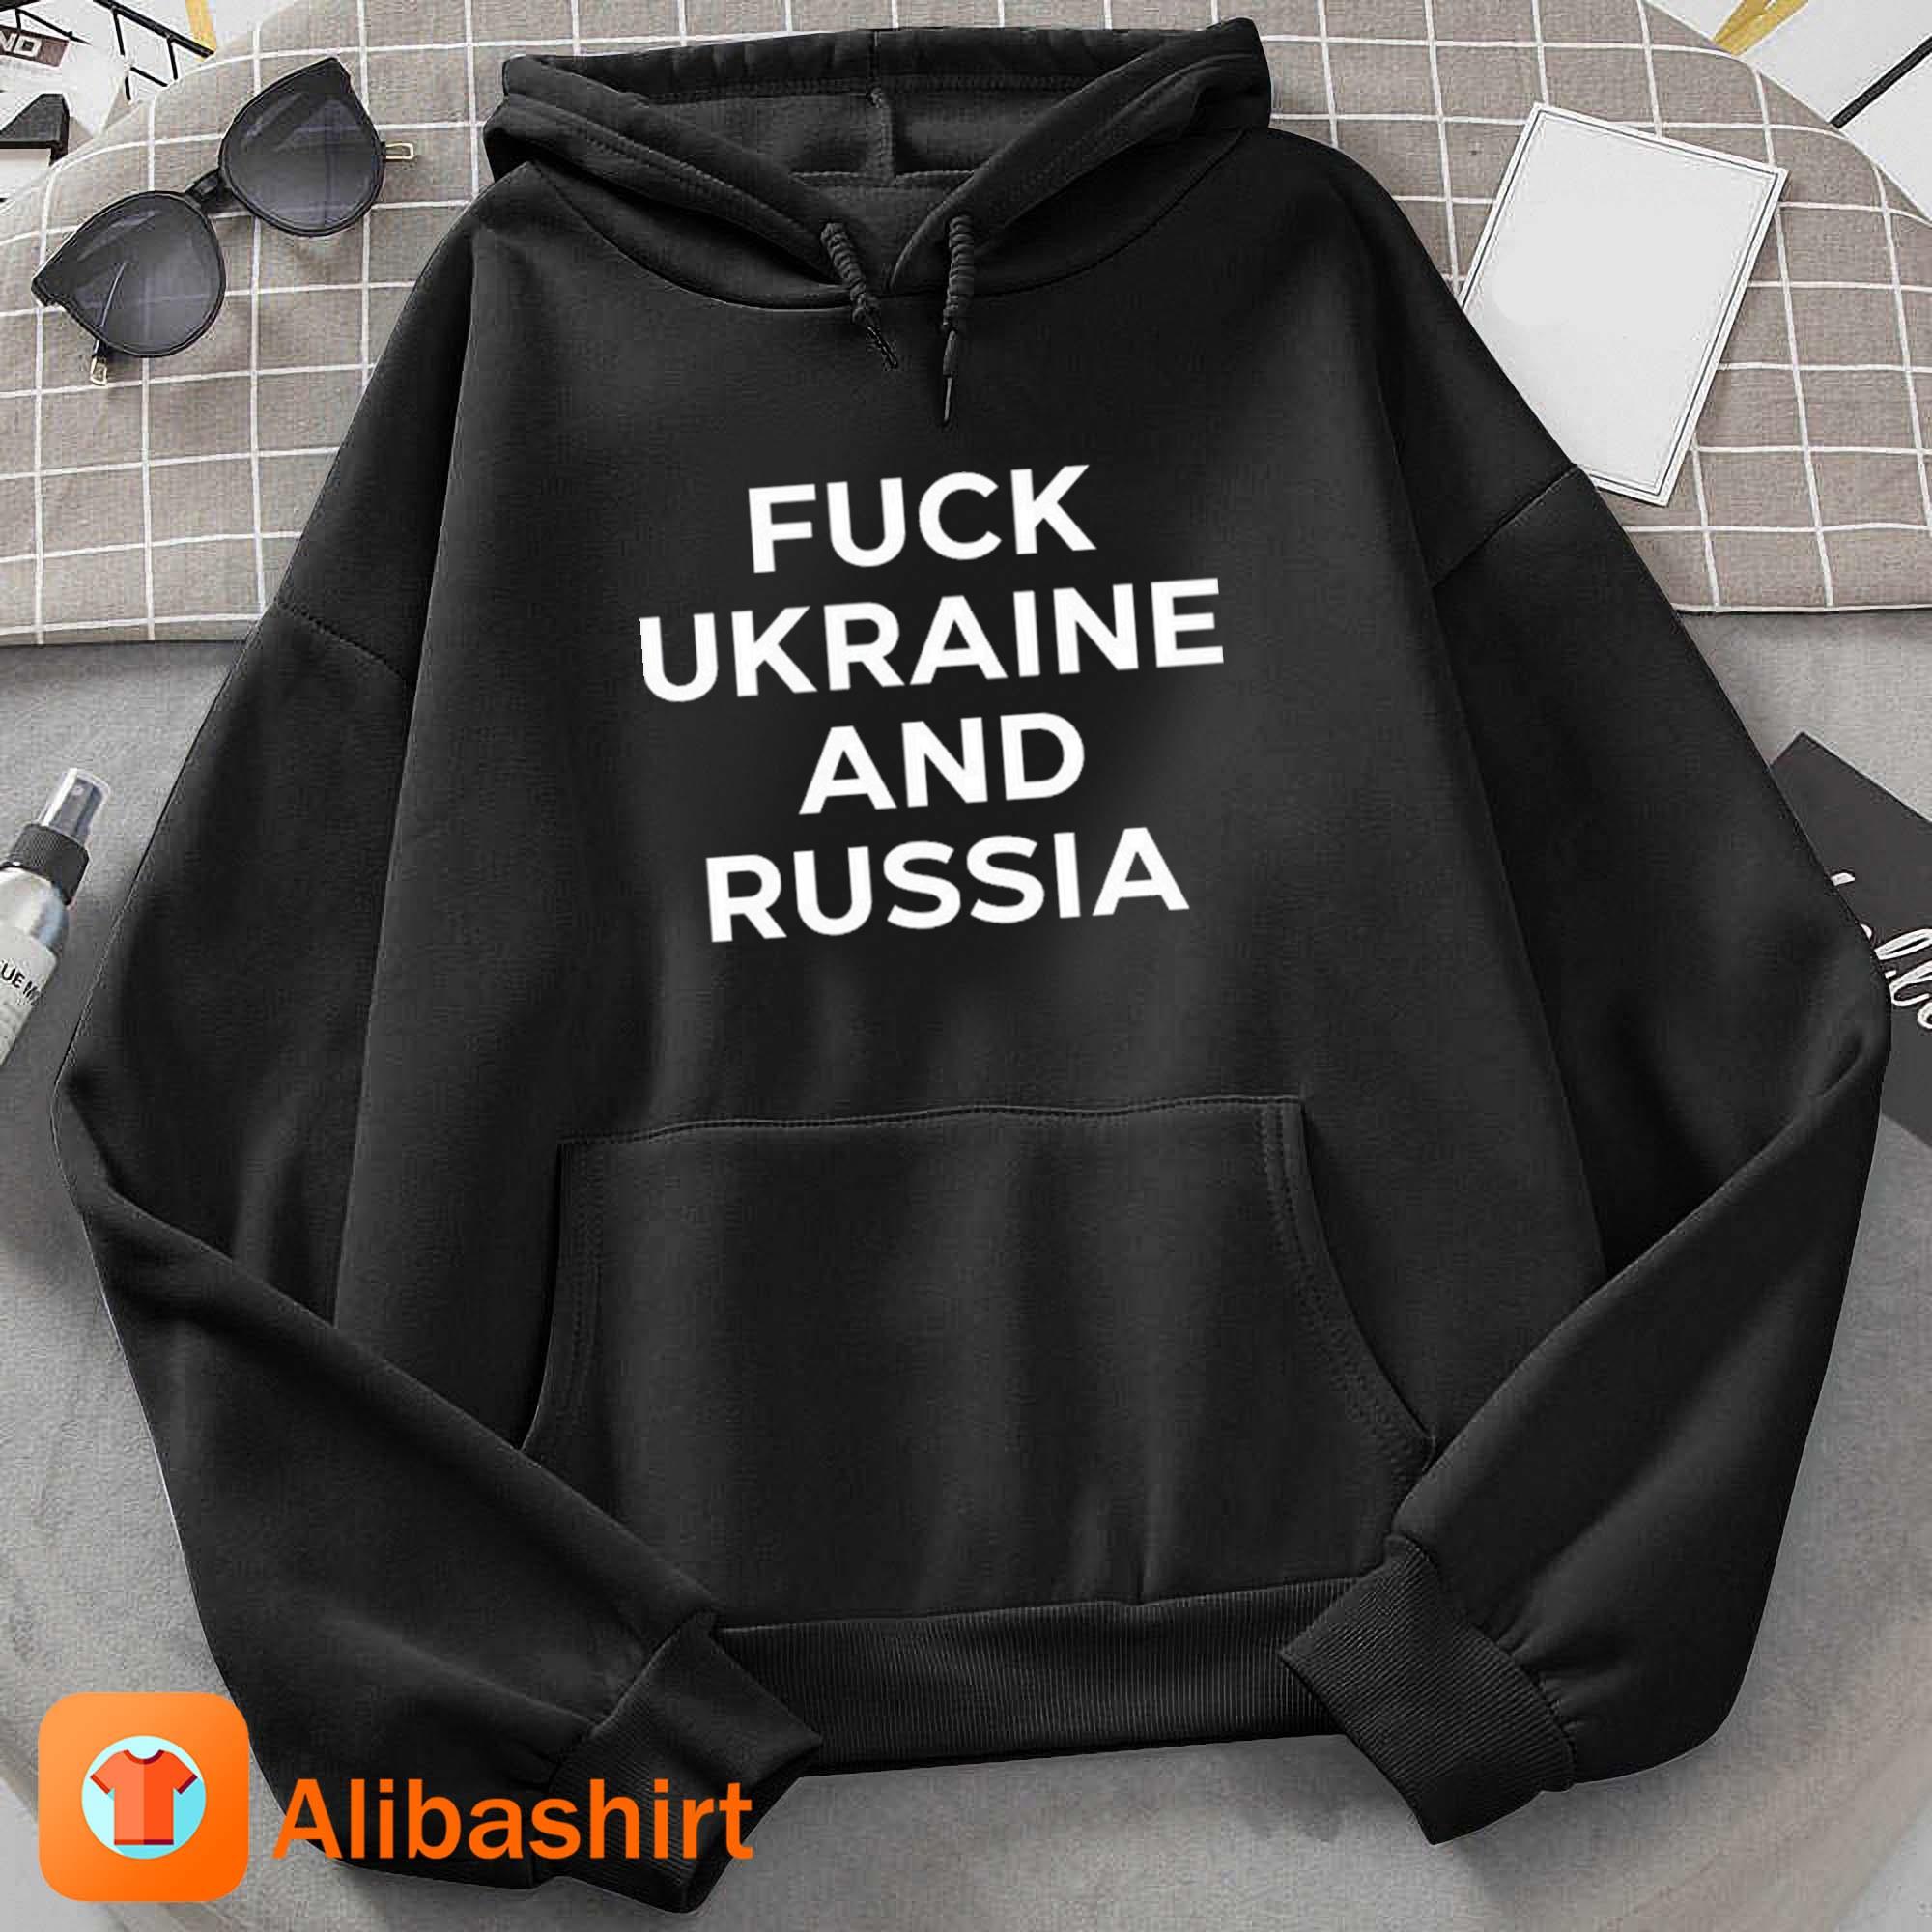 Official Philthatremains Fuck Ukraine And Russia Shirt Hoodie